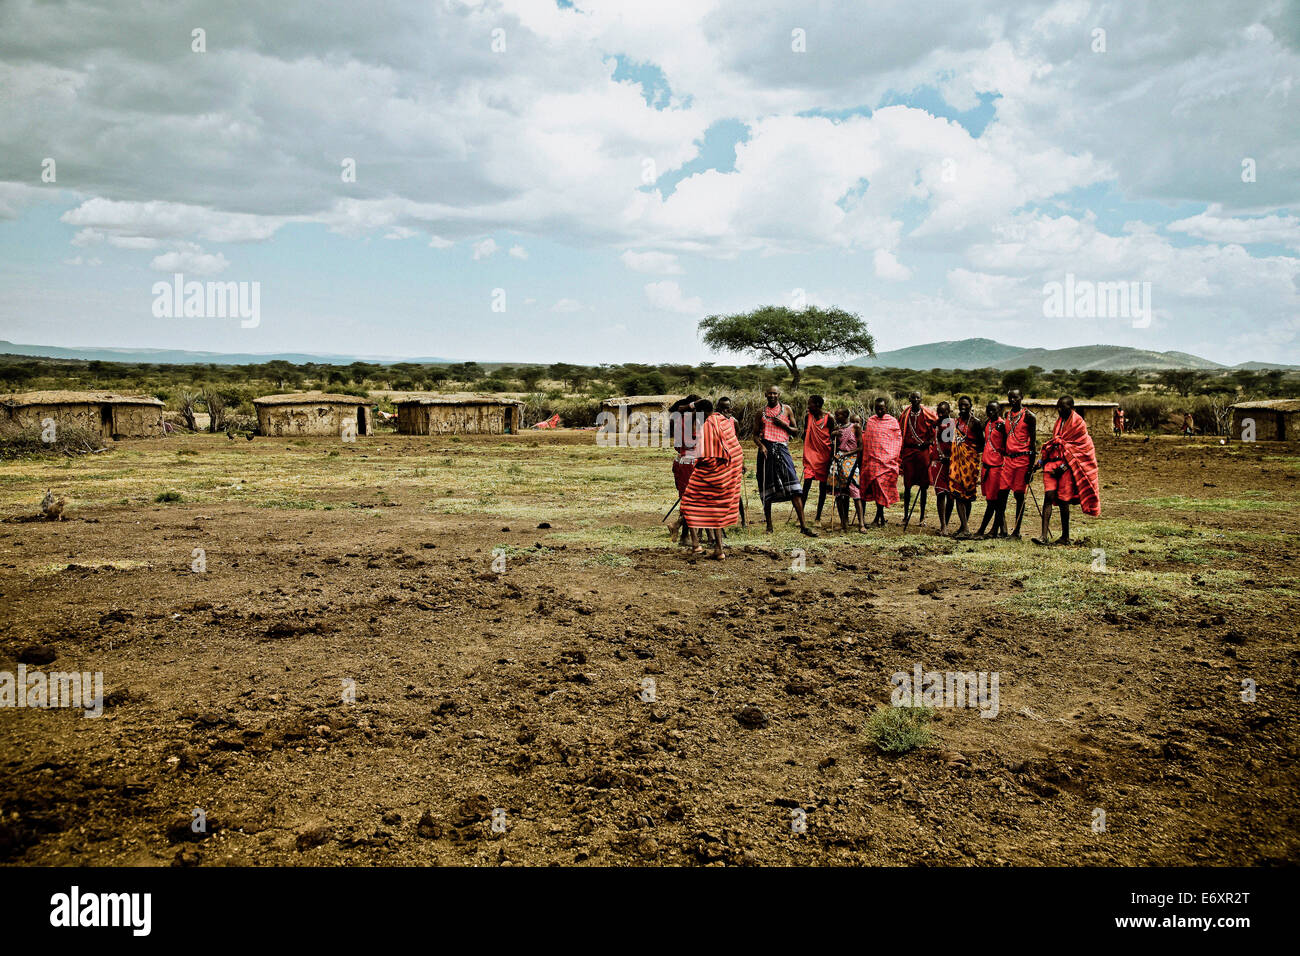 Young men from the Massai tribe near their village, Kenya, Africa Stock Photo